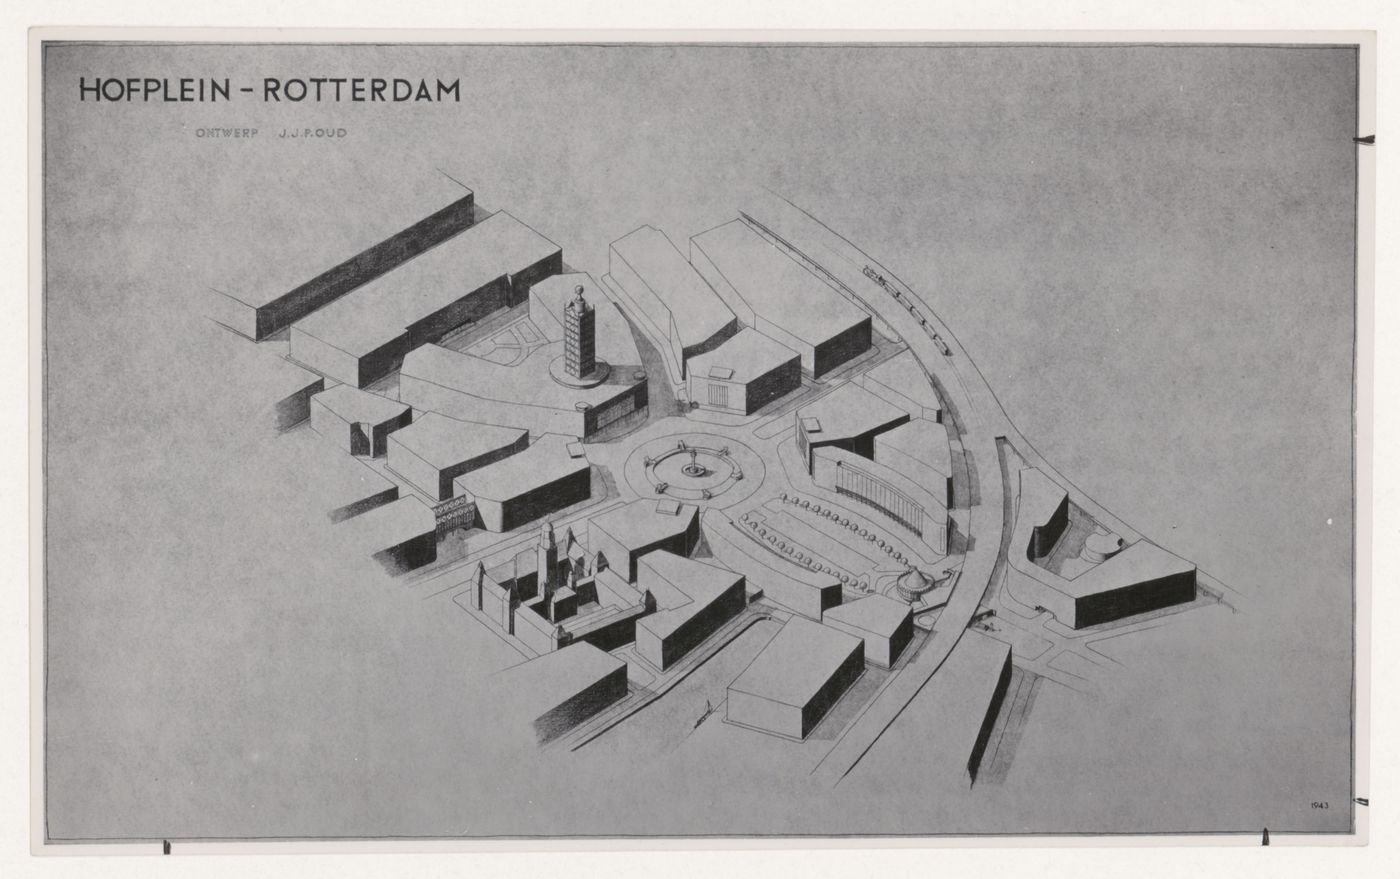 Photograph of a bird's-eye perspective drawing for the reconstruction of the Hofplein (city centre), Rotterdam, Netherlands